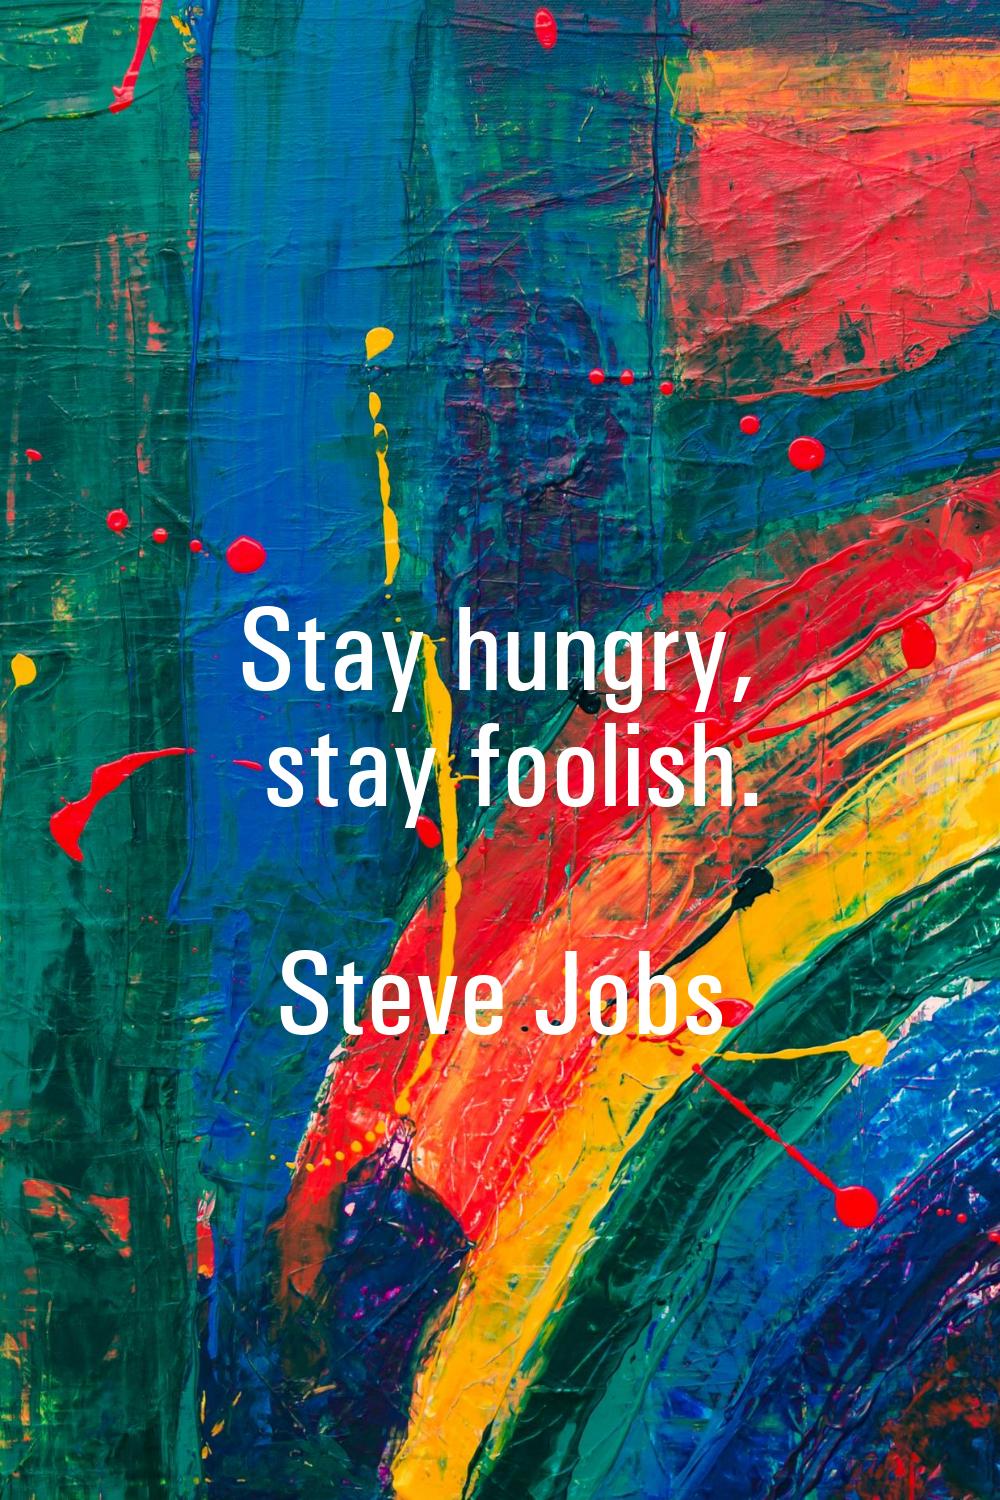 Stay hungry, stay foolish.